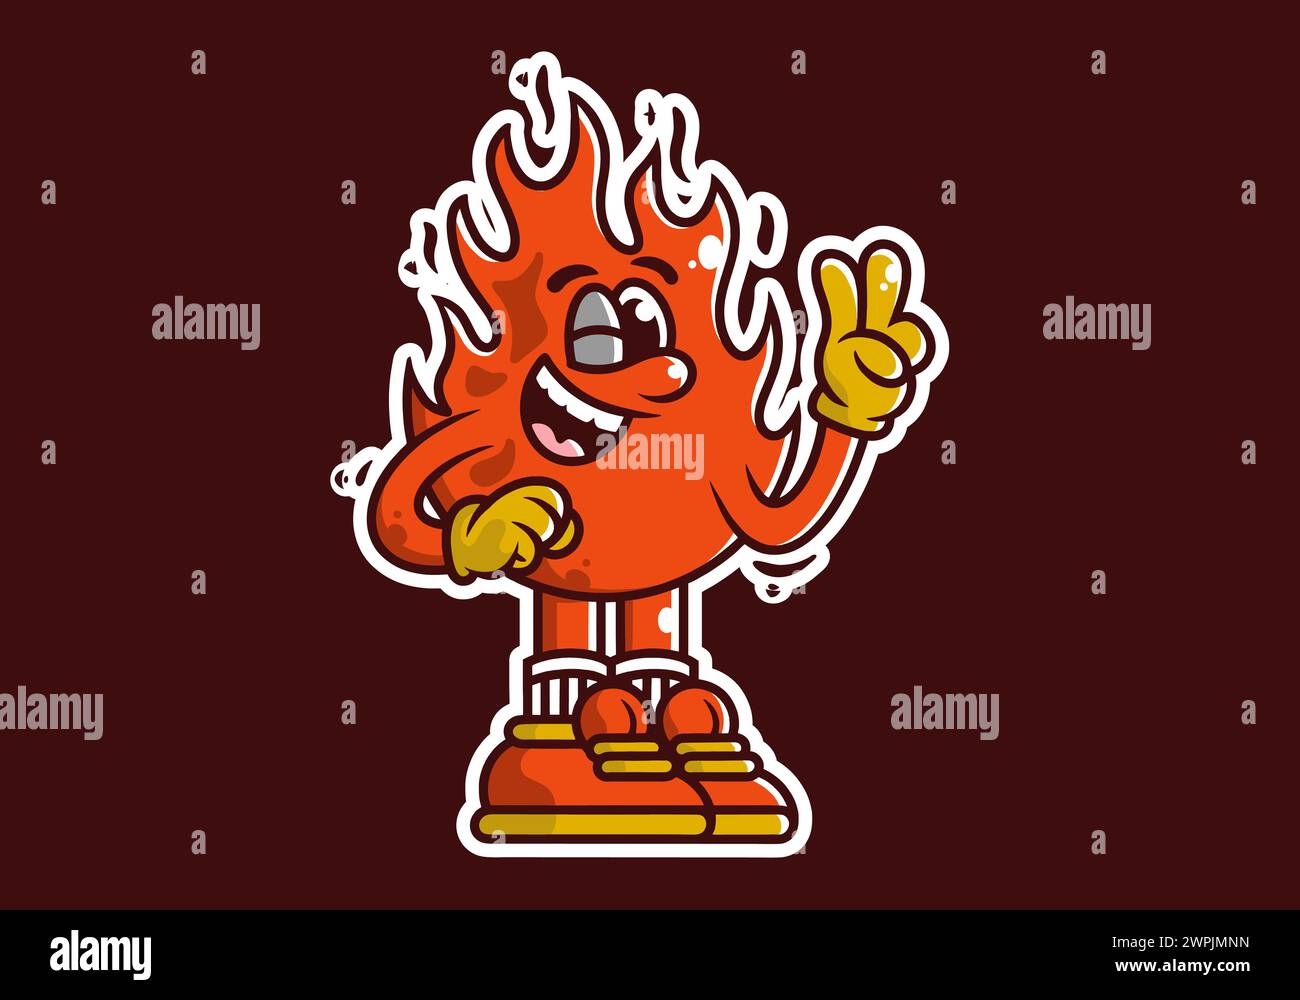 Mascot character illustration of a fire flame with hands forming a symbol of peace. Red colors Stock Vector